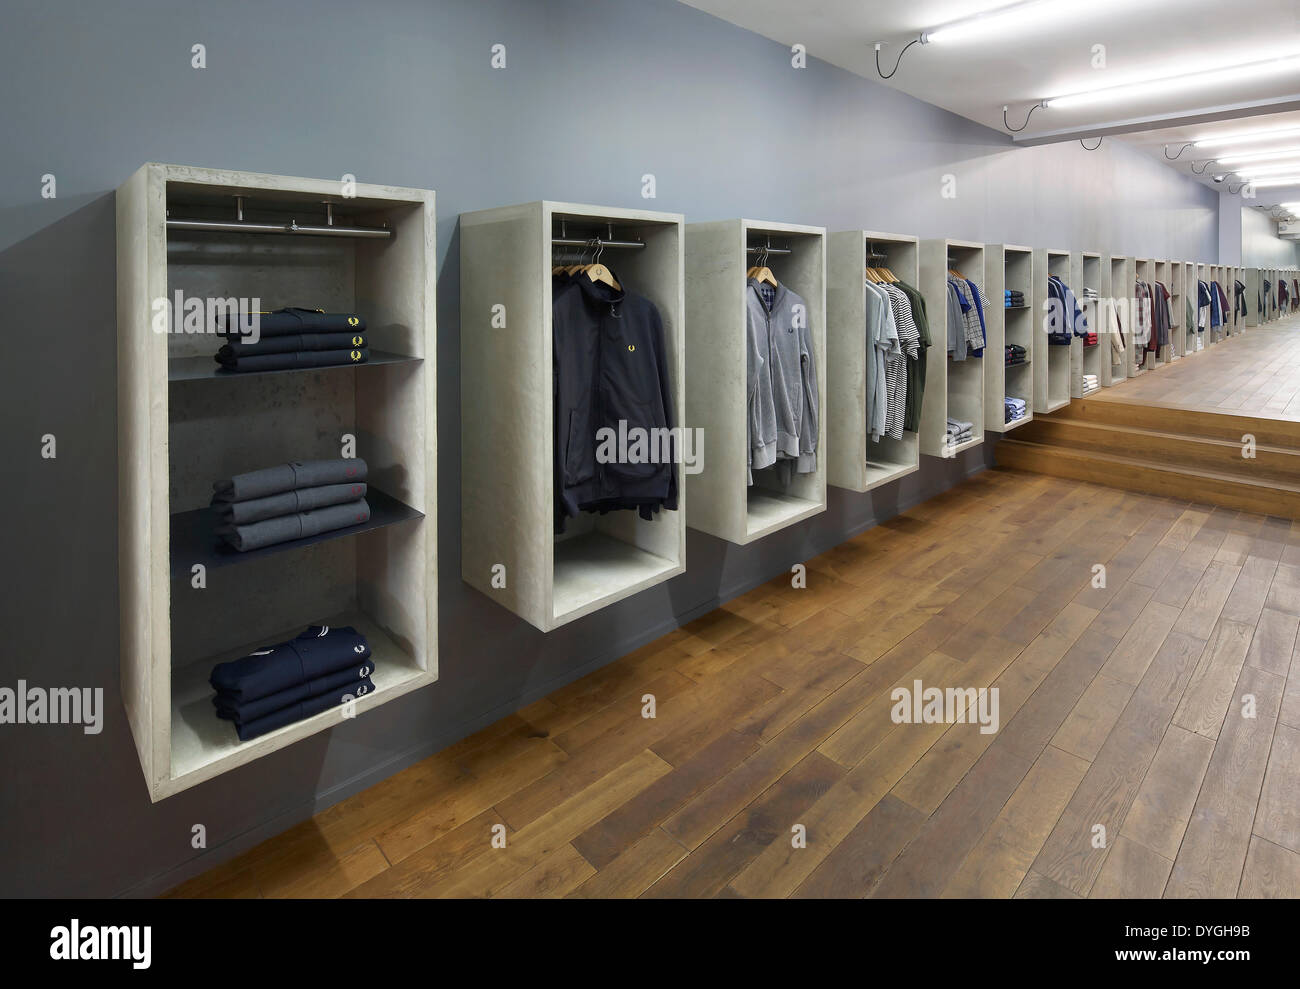 Fred Perry, München, Munich, Germany. Architect: BuckleyGrayYeoman, 2012. Perspective of wall-mounted display units. Stock Photo